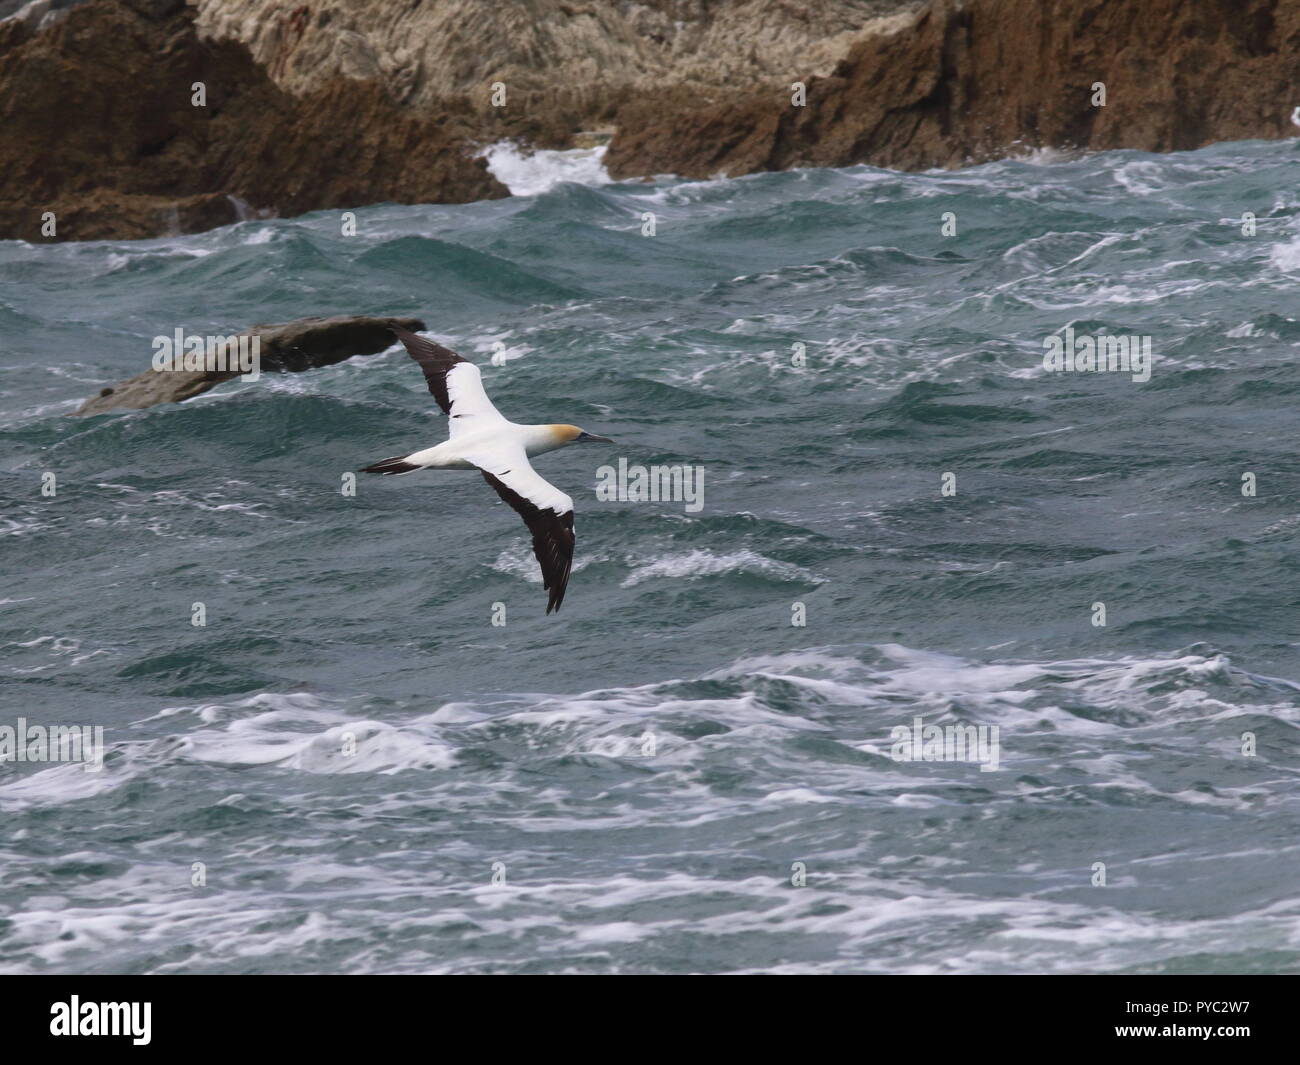 Morus serrator, Australian Gannet, flying over choppy sea with a swell, showing open wings with heavy black flight feathers and orange head. Stock Photo